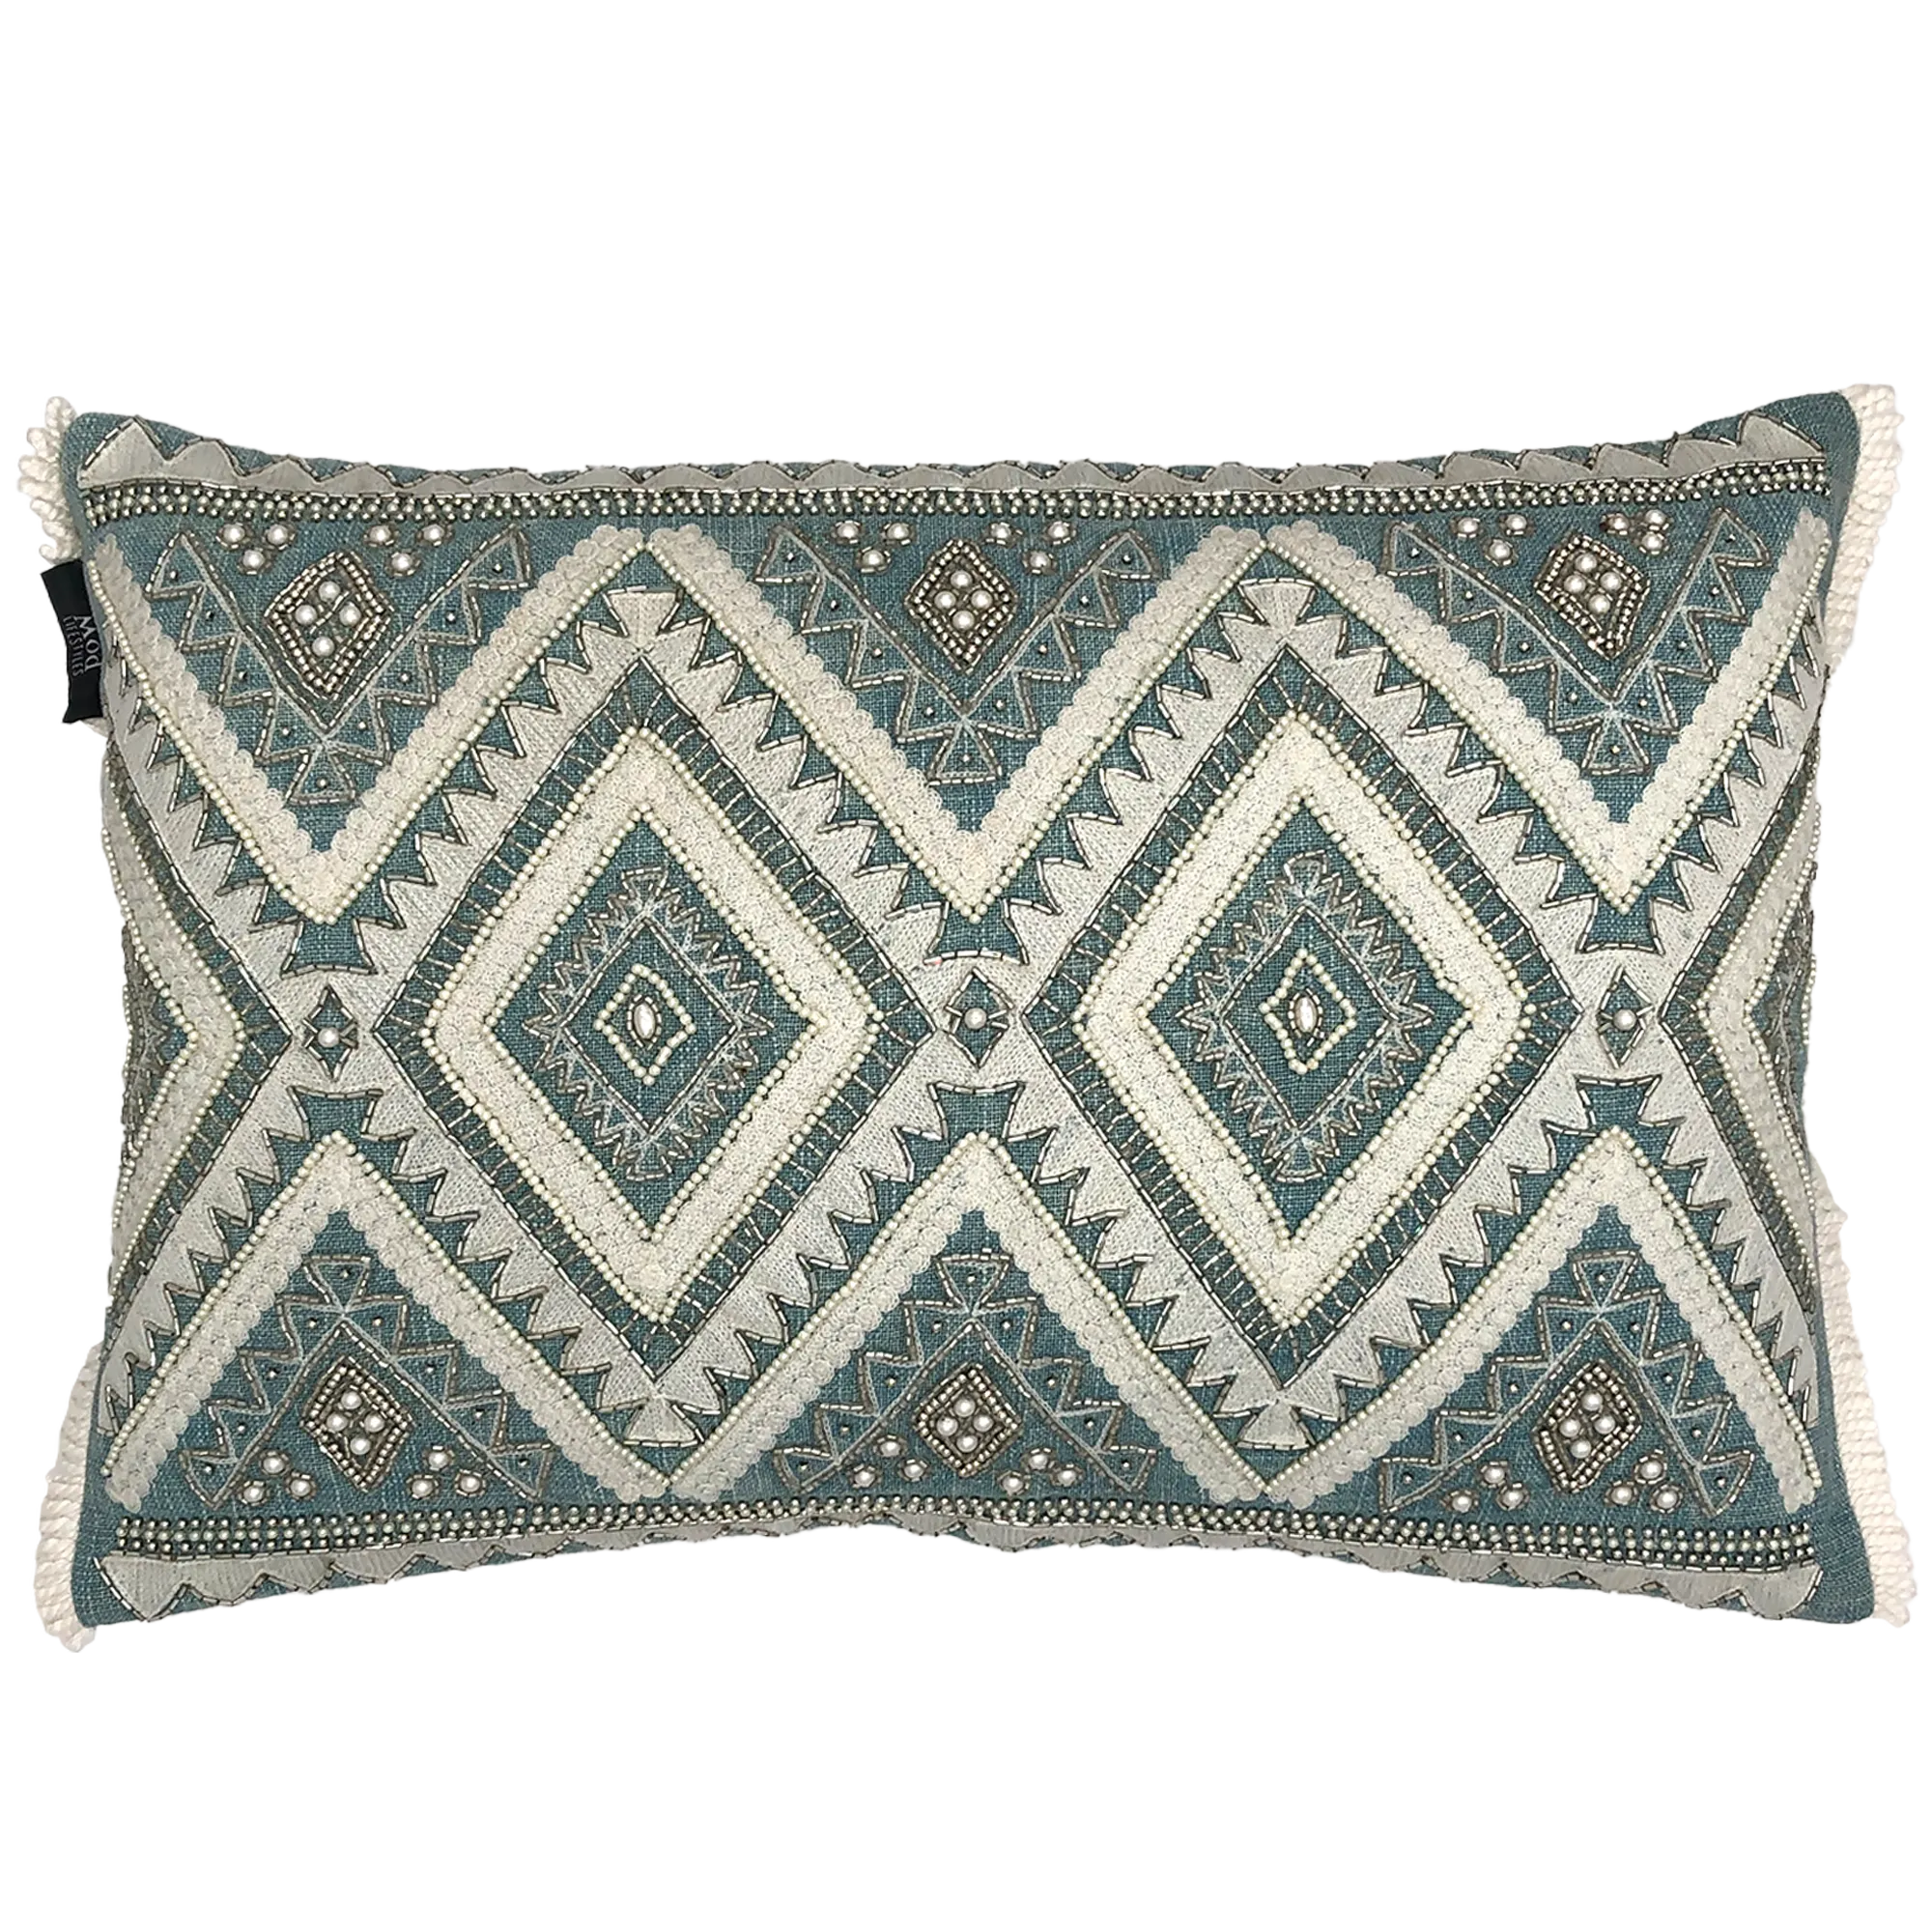 Diamond Beads Embroidery Pillow with Fringe, 14''x20'' home decor - Mod Lifestyles